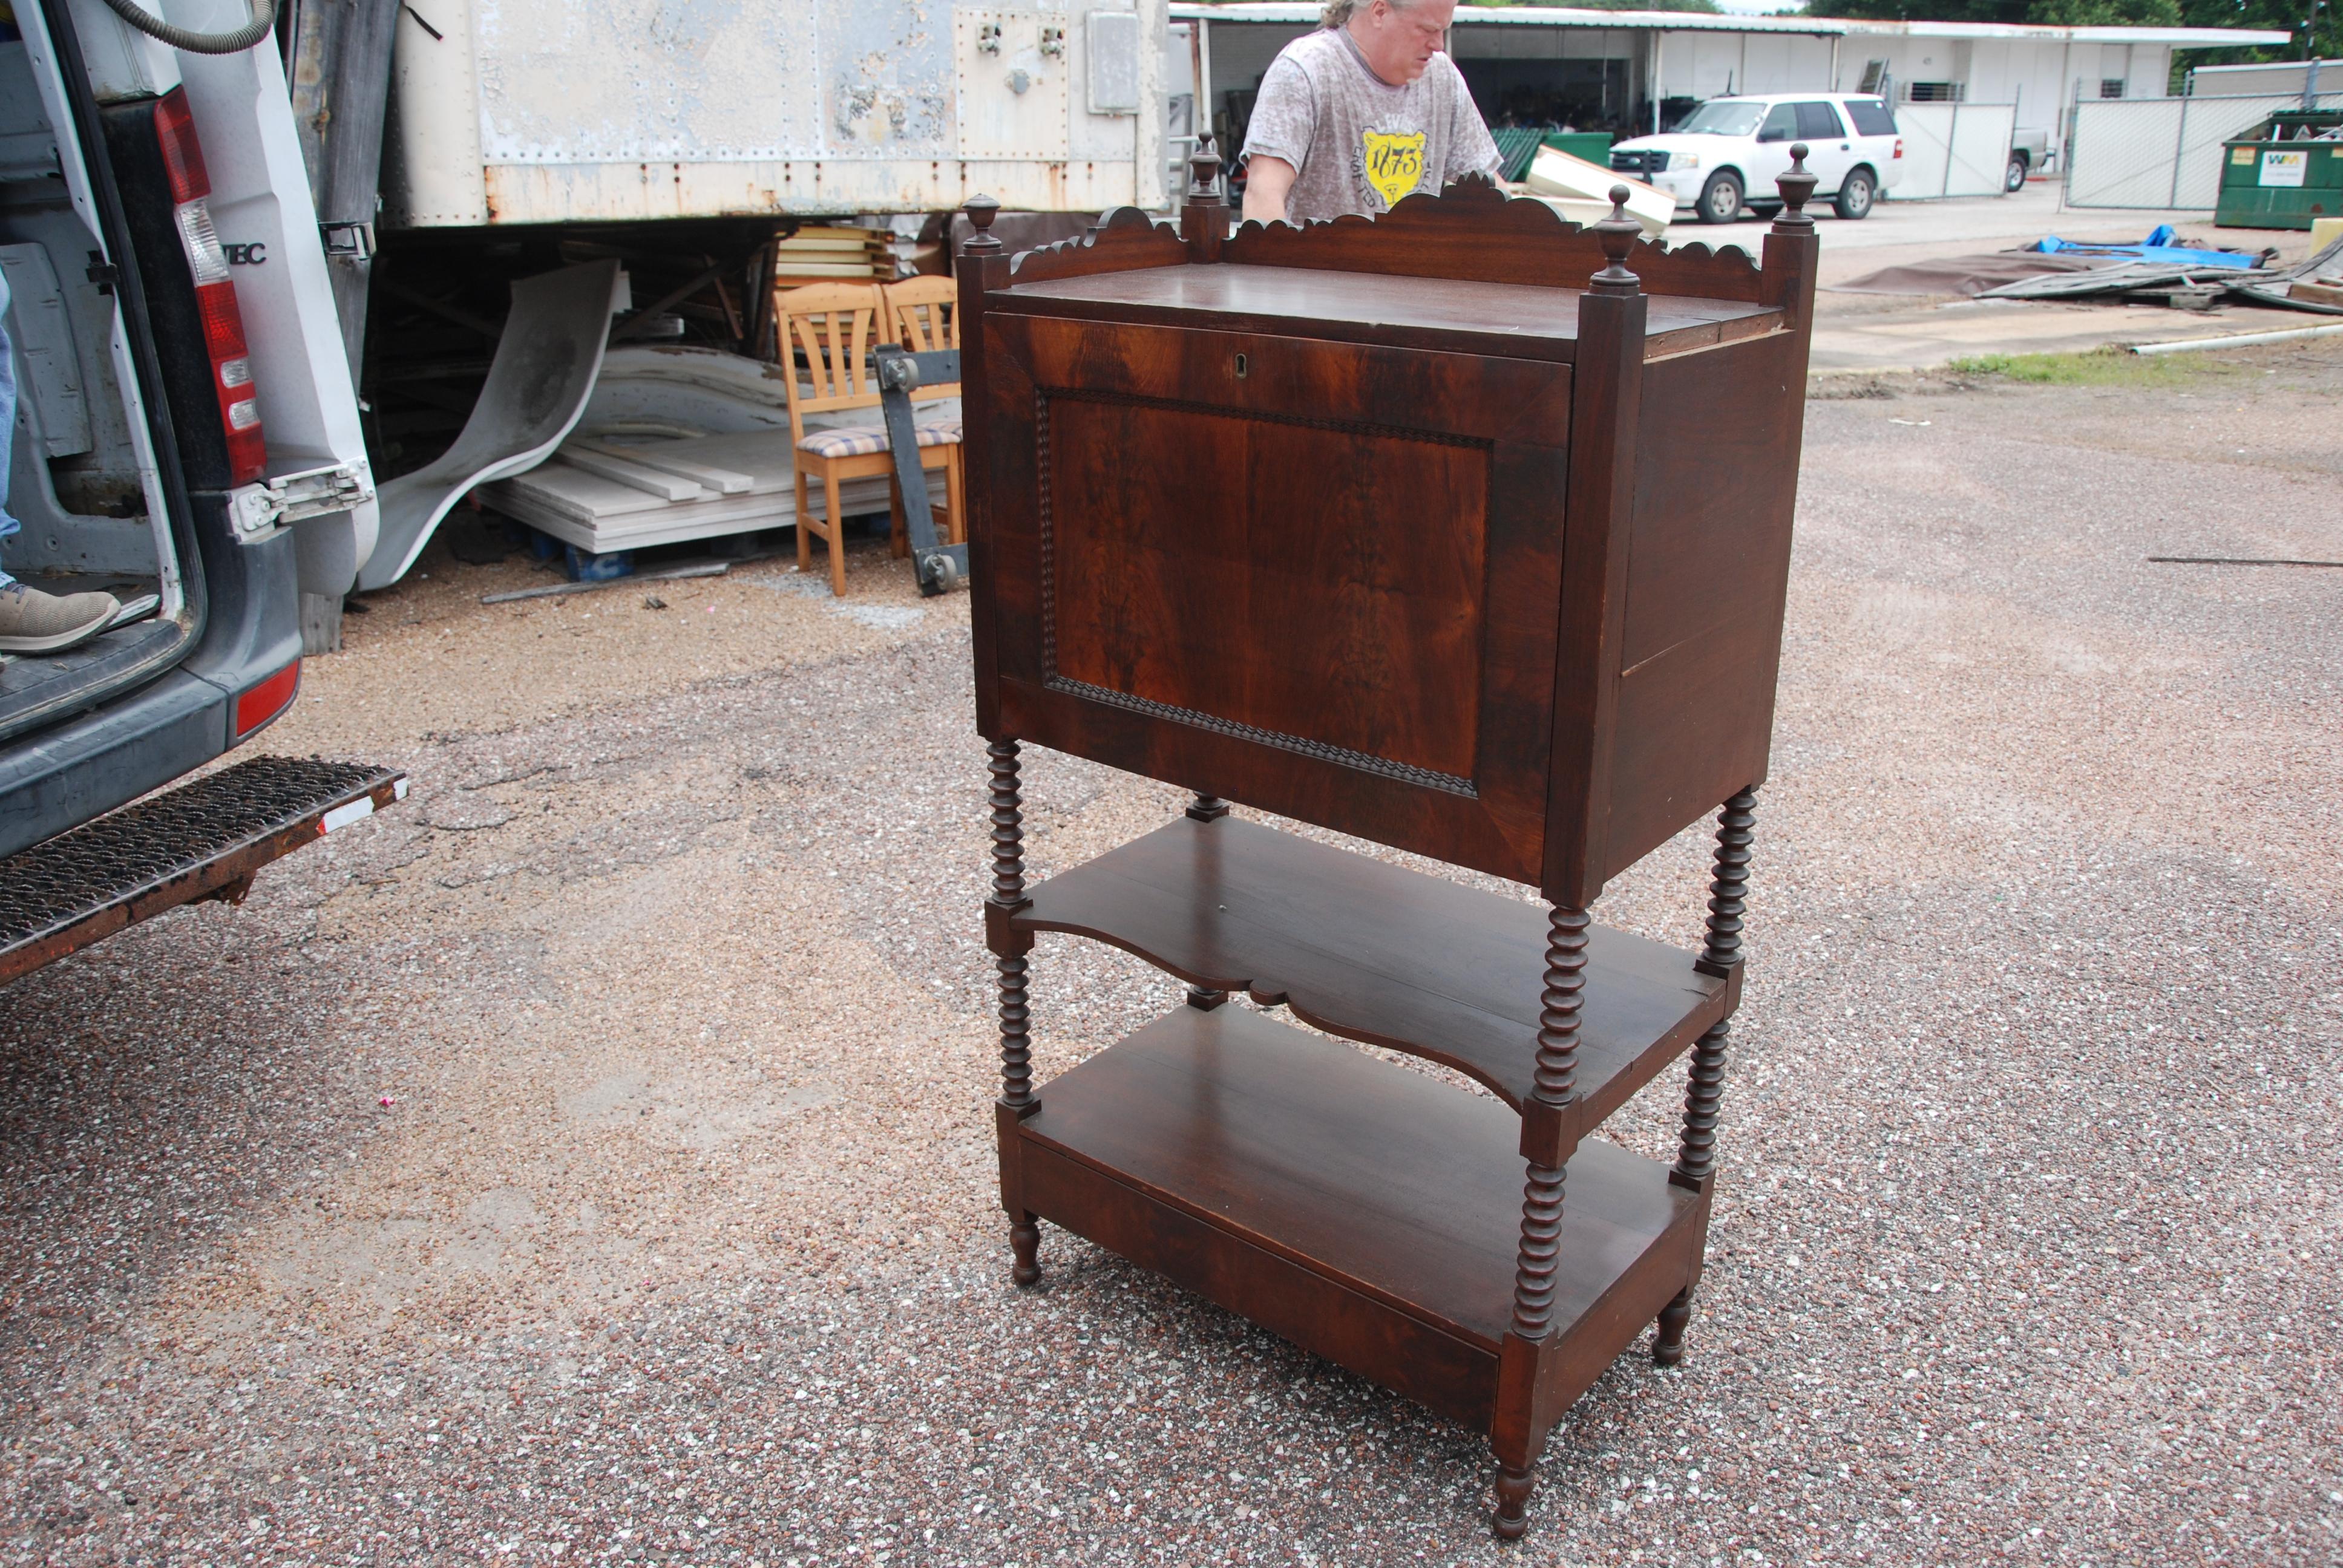 Bonheur du Jour secretary desk cabinet,
circa late 1880s.
 
Dark walnut with finial accents and turned legs. The hinged writing surface opens to reveal a fitted interior with 5 drawers and overhead mail slots. There are 2 shelves underneath and a